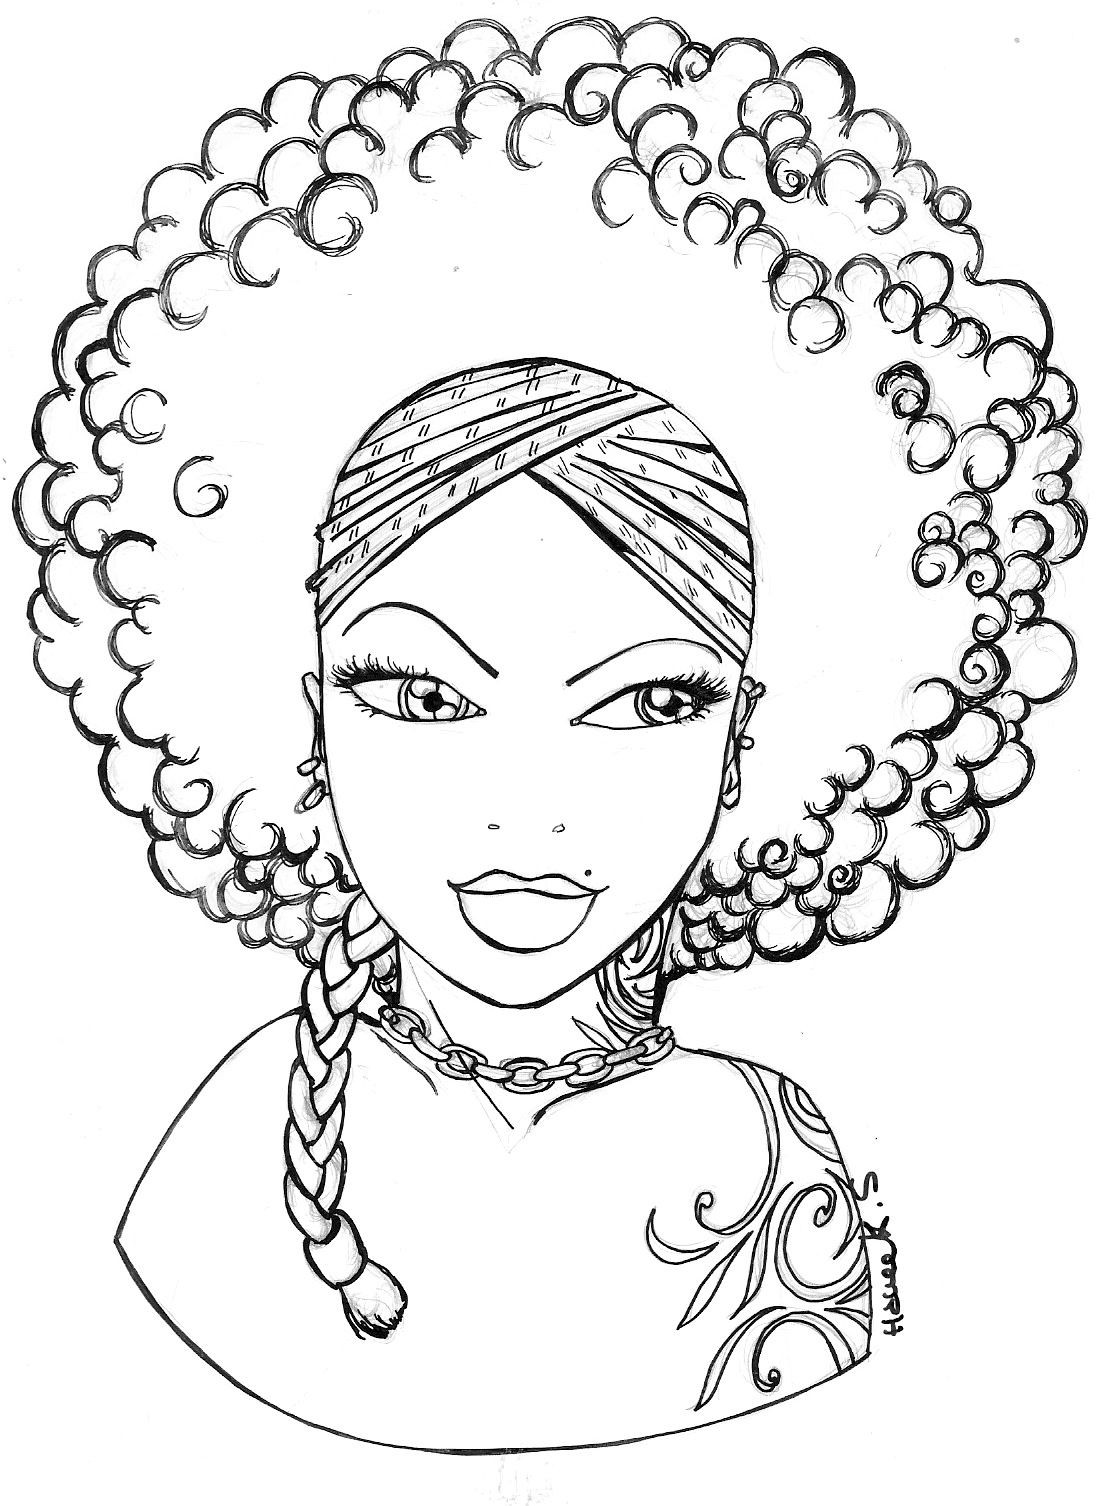 25 Of the Best Ideas for Coloring Pages Black Girls - Home Inspiration